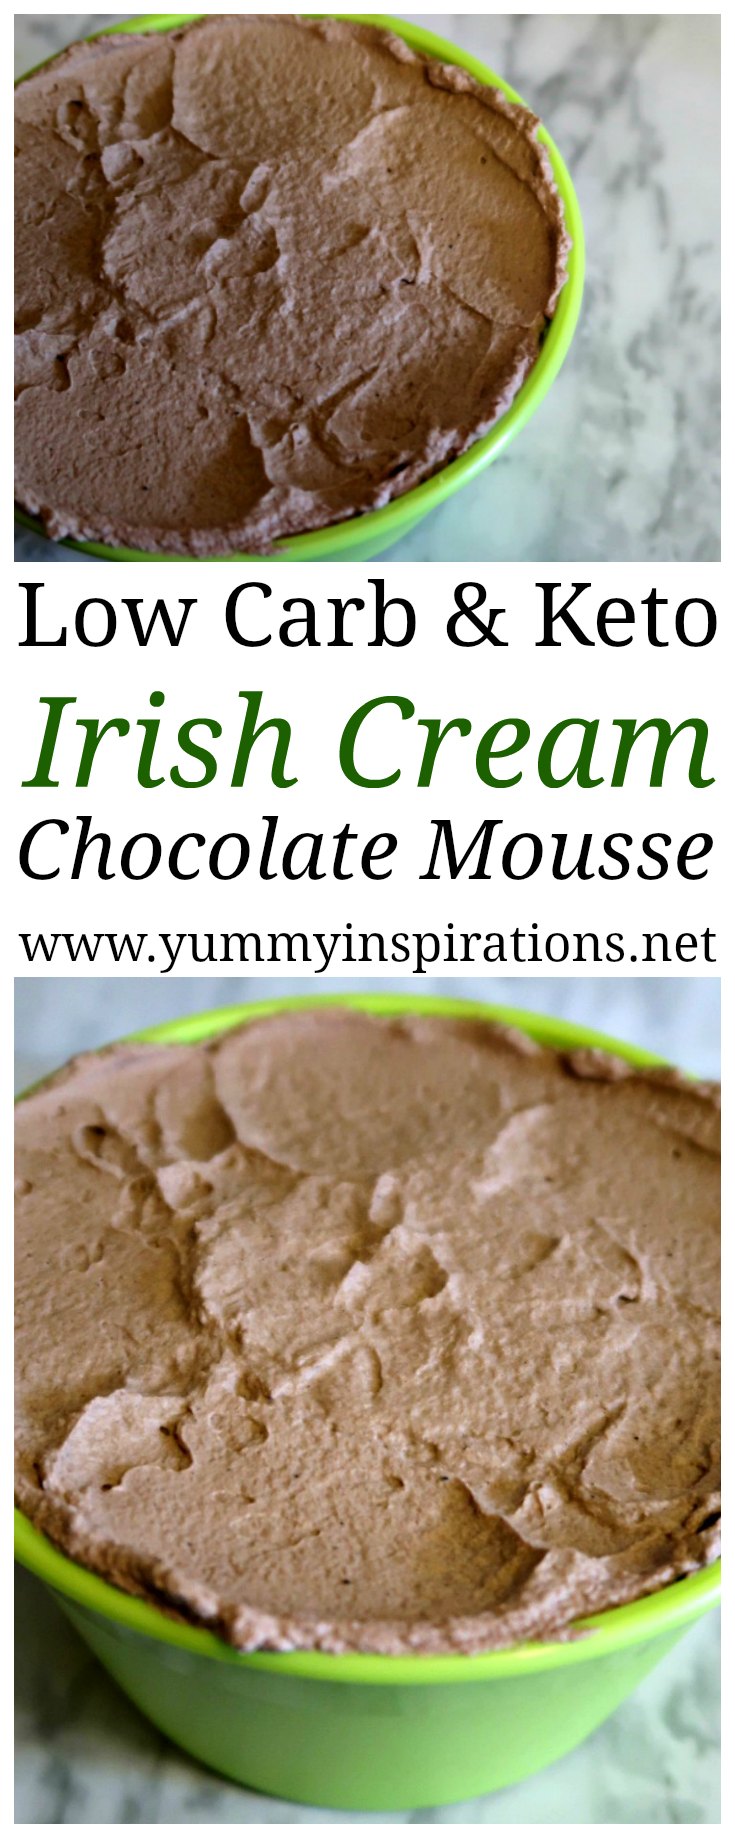 Low Carb Irish Cream Chocolate Mousse Recipe - An Easy Keto Baileys Mousse that's richly chocolatey, without gelatin and with whipped cream.